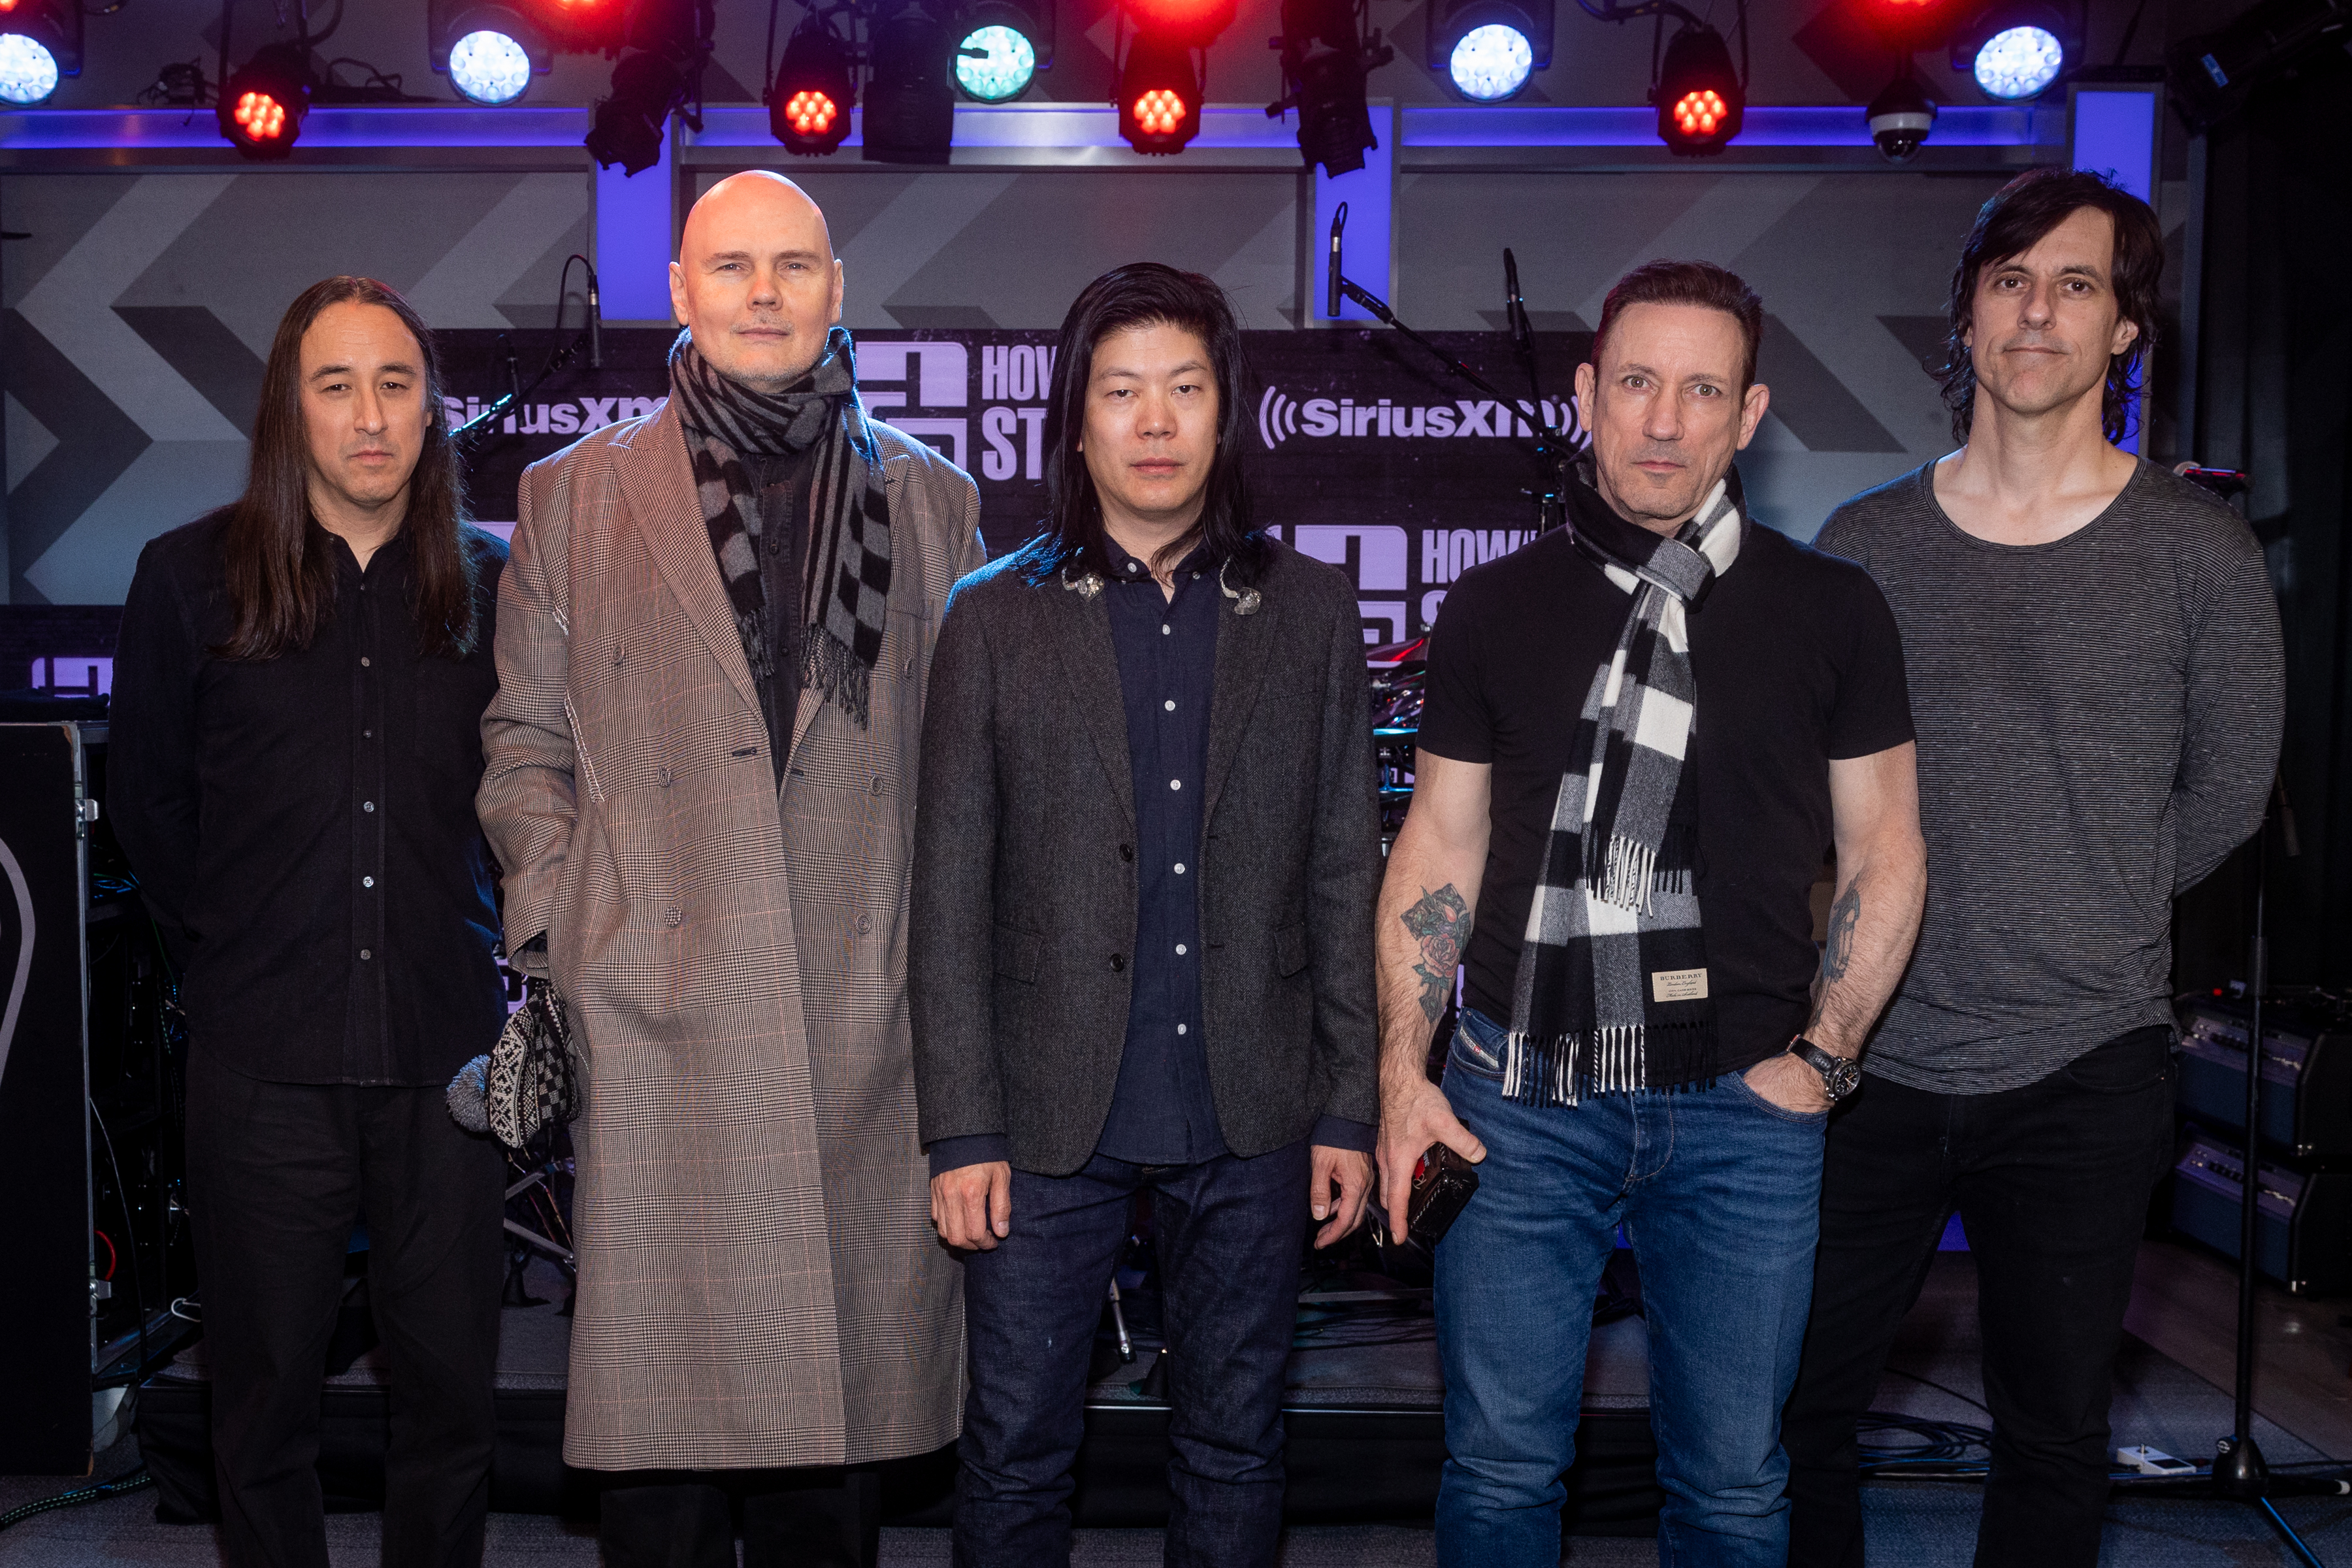 Jeff Schroeder, Billy Corgan, Jimmy Chamberlin, James Iha, and Matt McJunkins of the Smashing Pumpkins visit The Howard Stern Show on March 28, 2023, in Los Angeles